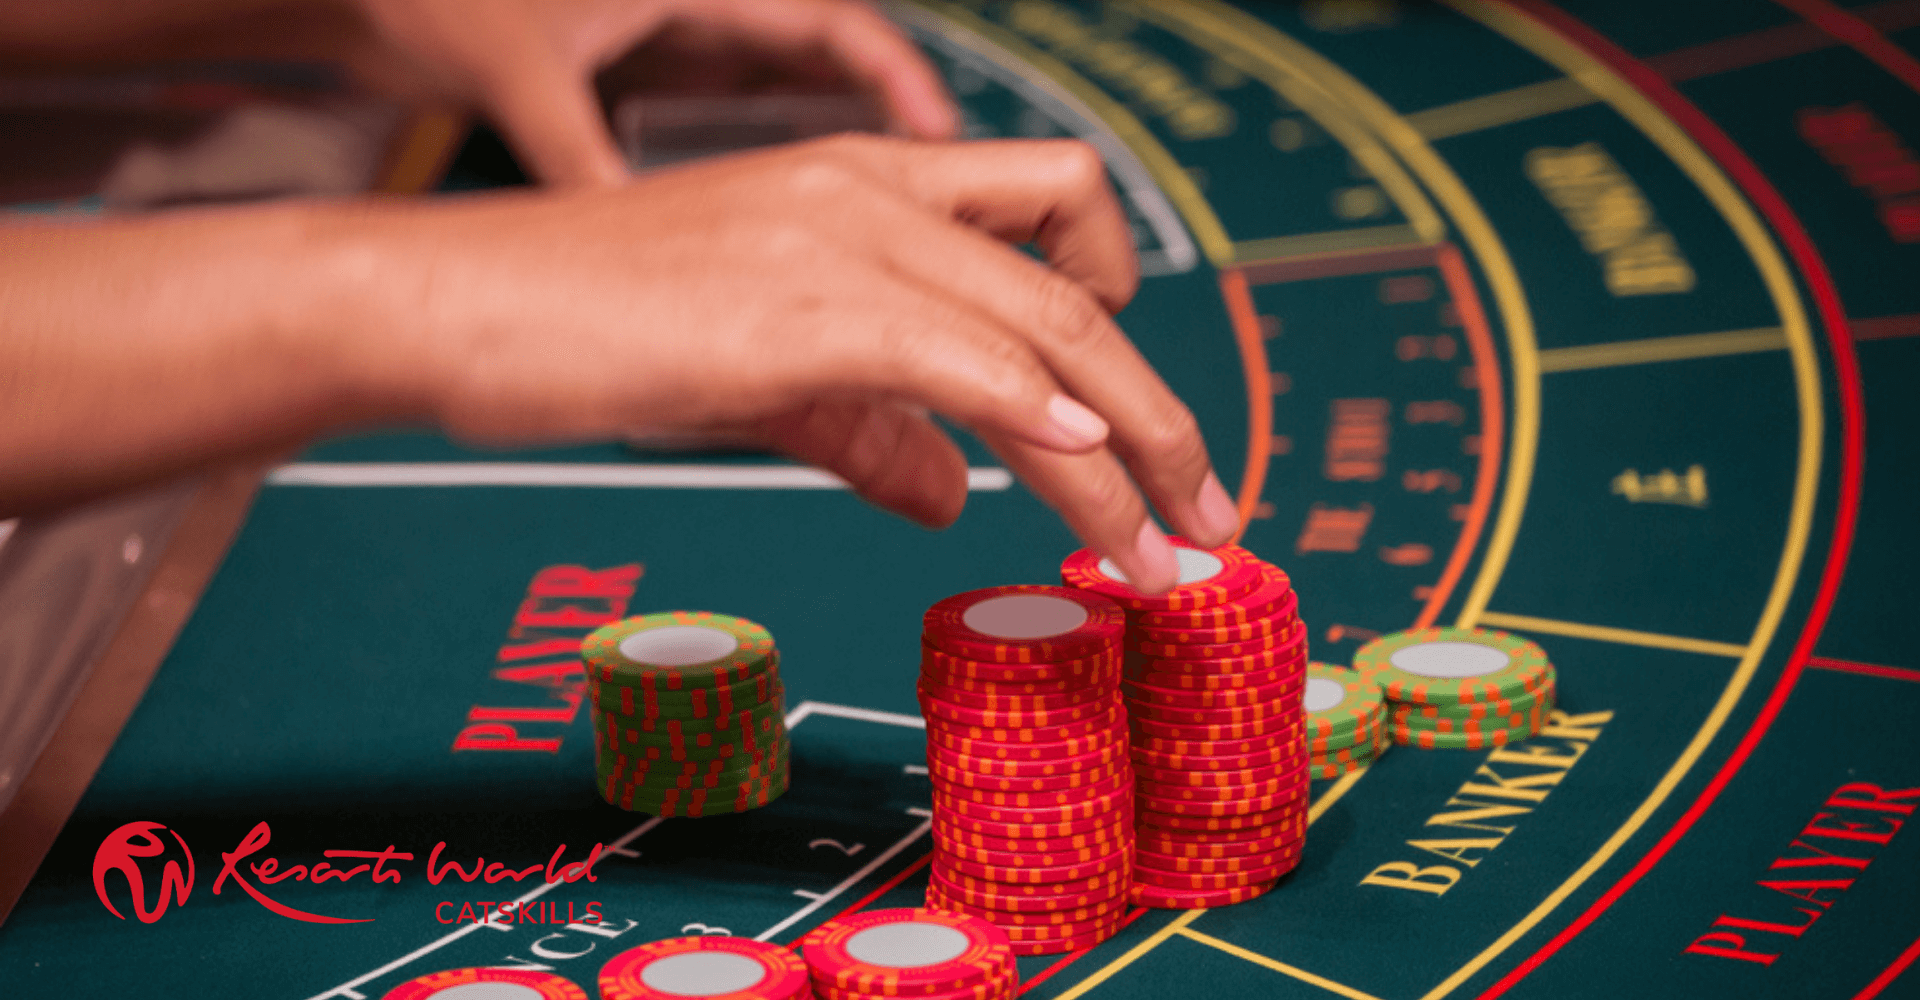 Play Baccarat – A Simple, Fun Game, With Good Odds